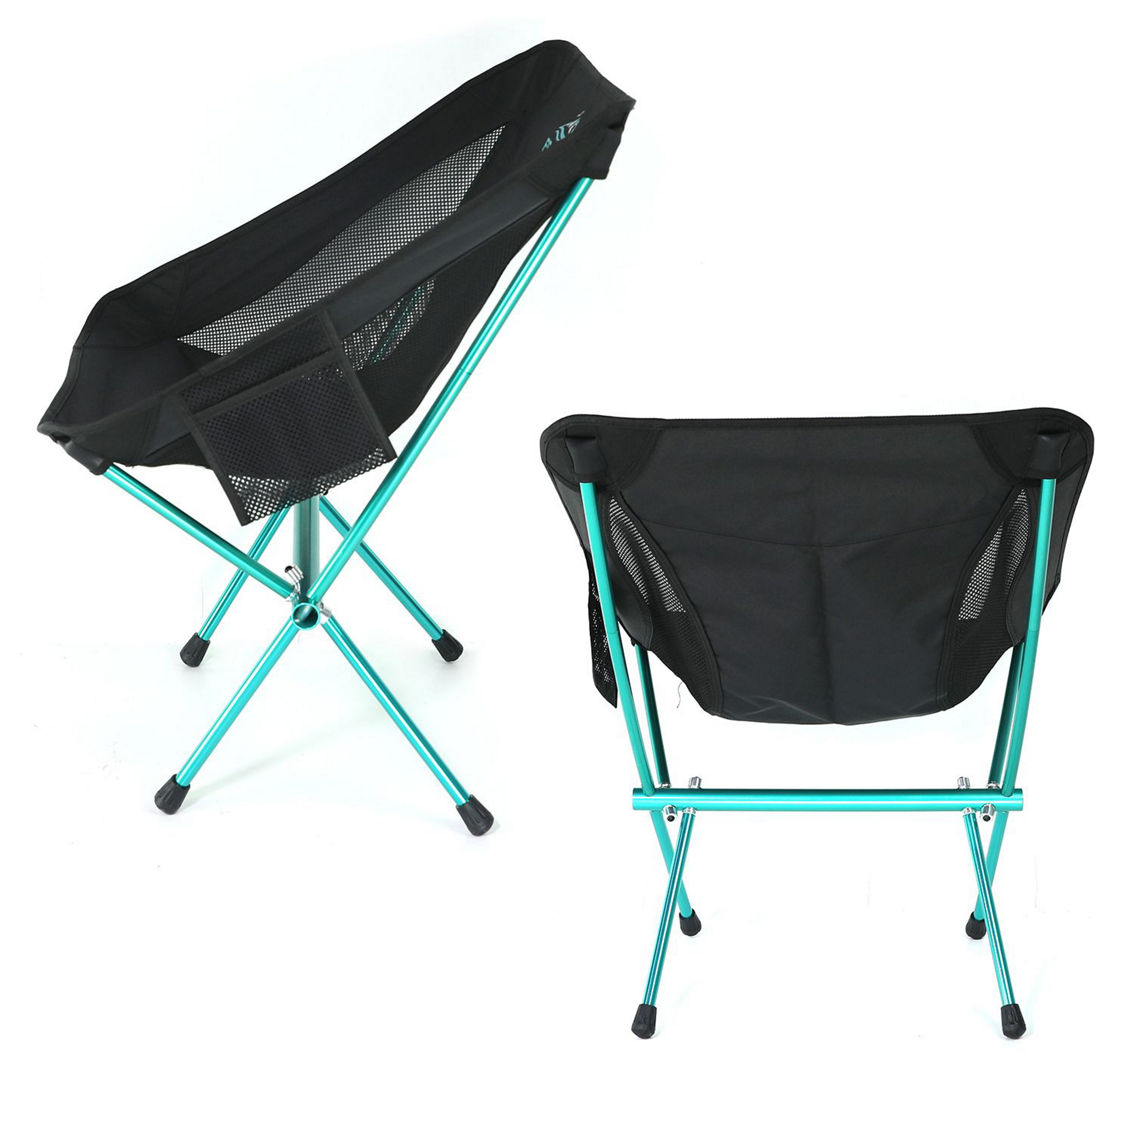 Noosa Ultralight Camping Chair - Image 4 of 5